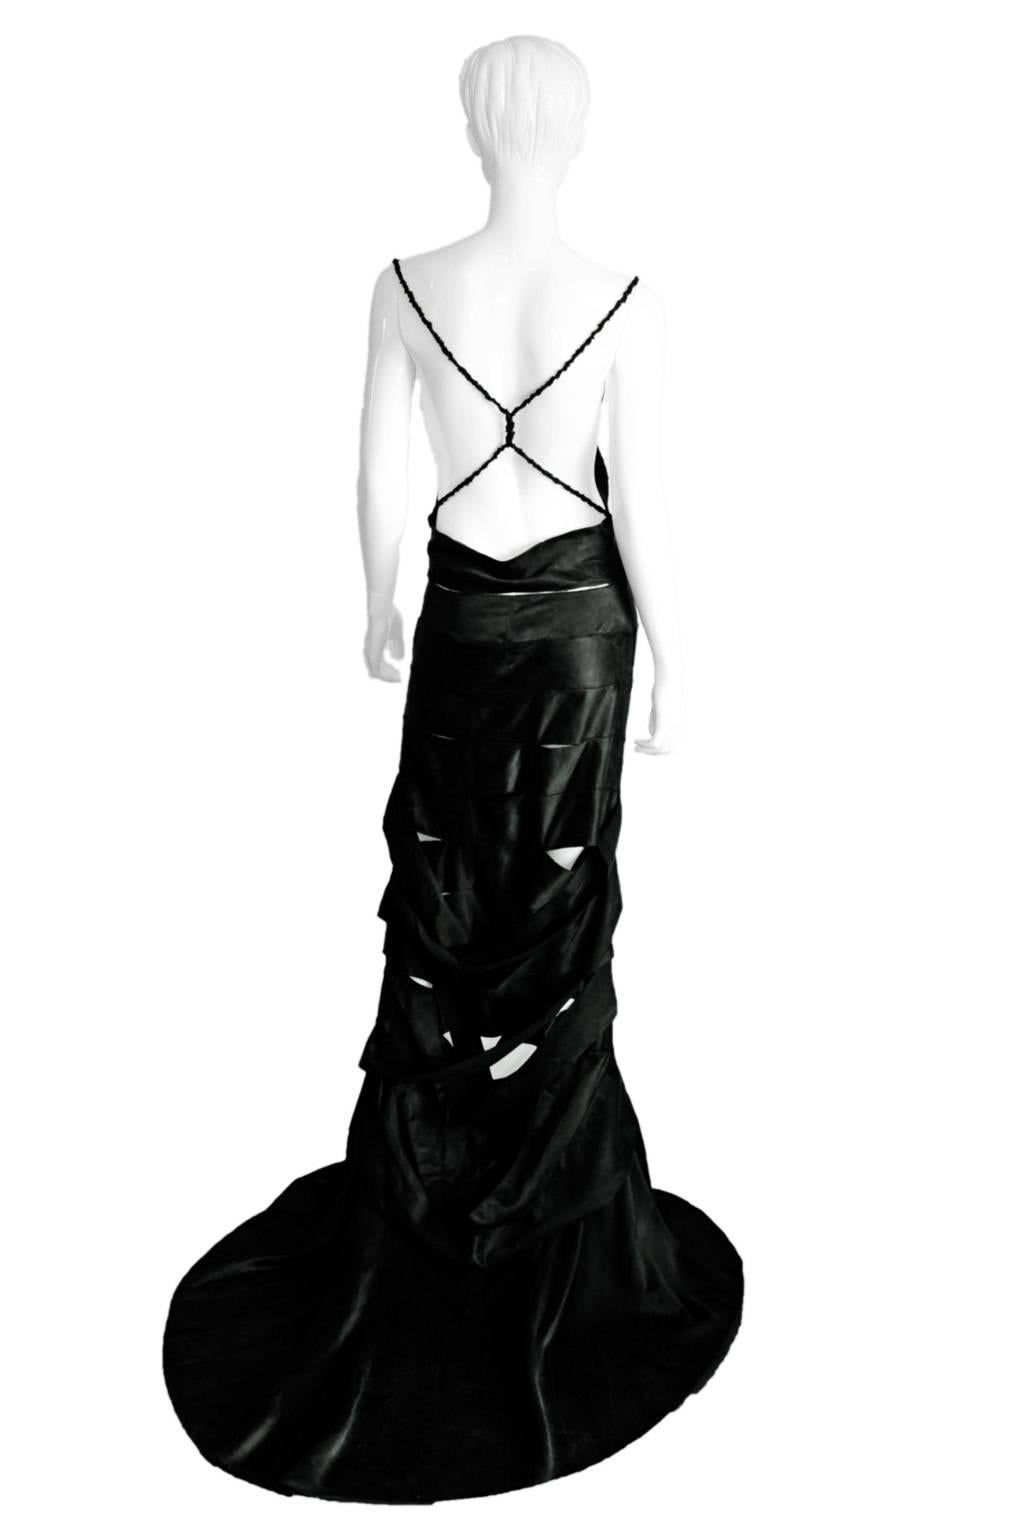 Uber Rare Tom Ford Gucci FW02 Gothic Collection Black Silk Bandage Backless Runway Gown!

Who could ever forget Tom Ford's fall/winter 2002 Gothic Collection for Gucci... with that dark chinoiseriesque styling & heavenly detailing? This